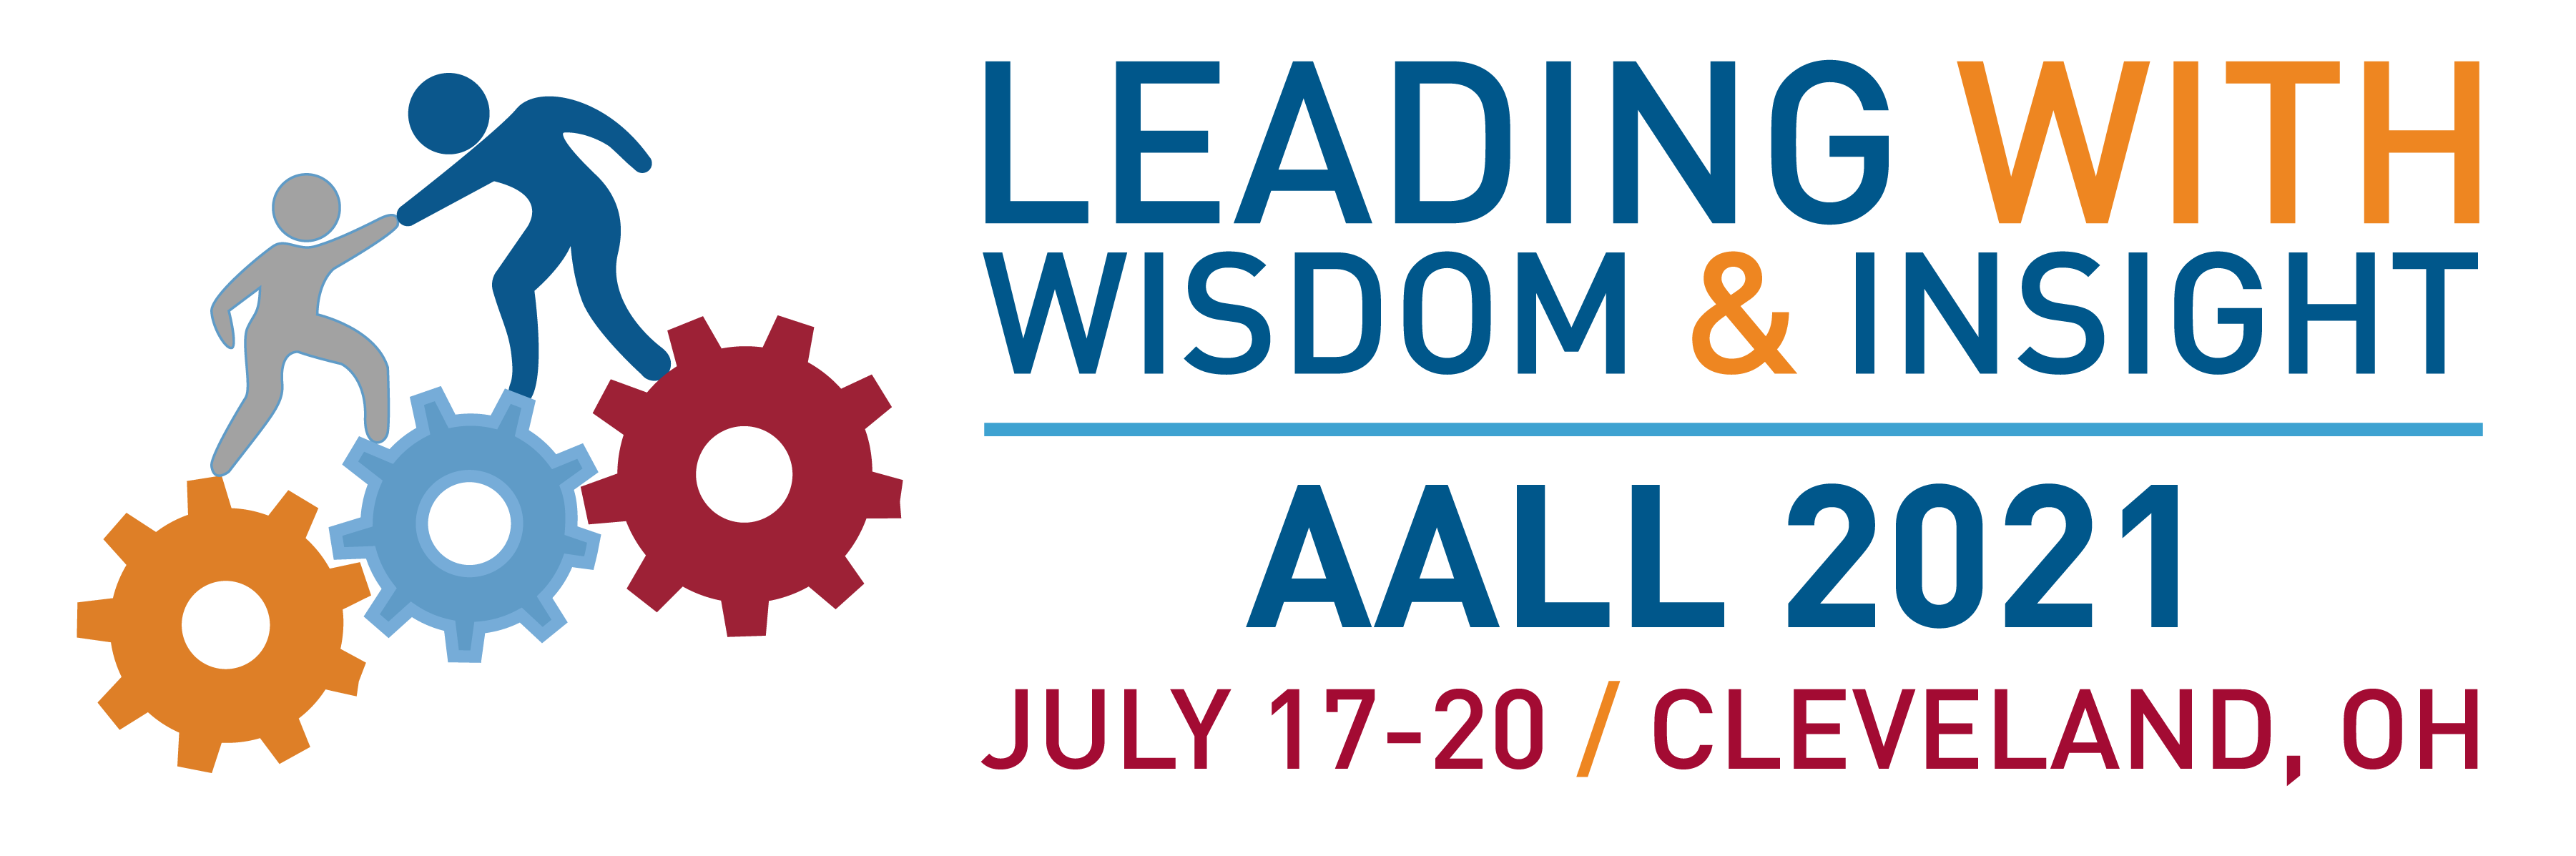 AALL Annual Meeting & Conference